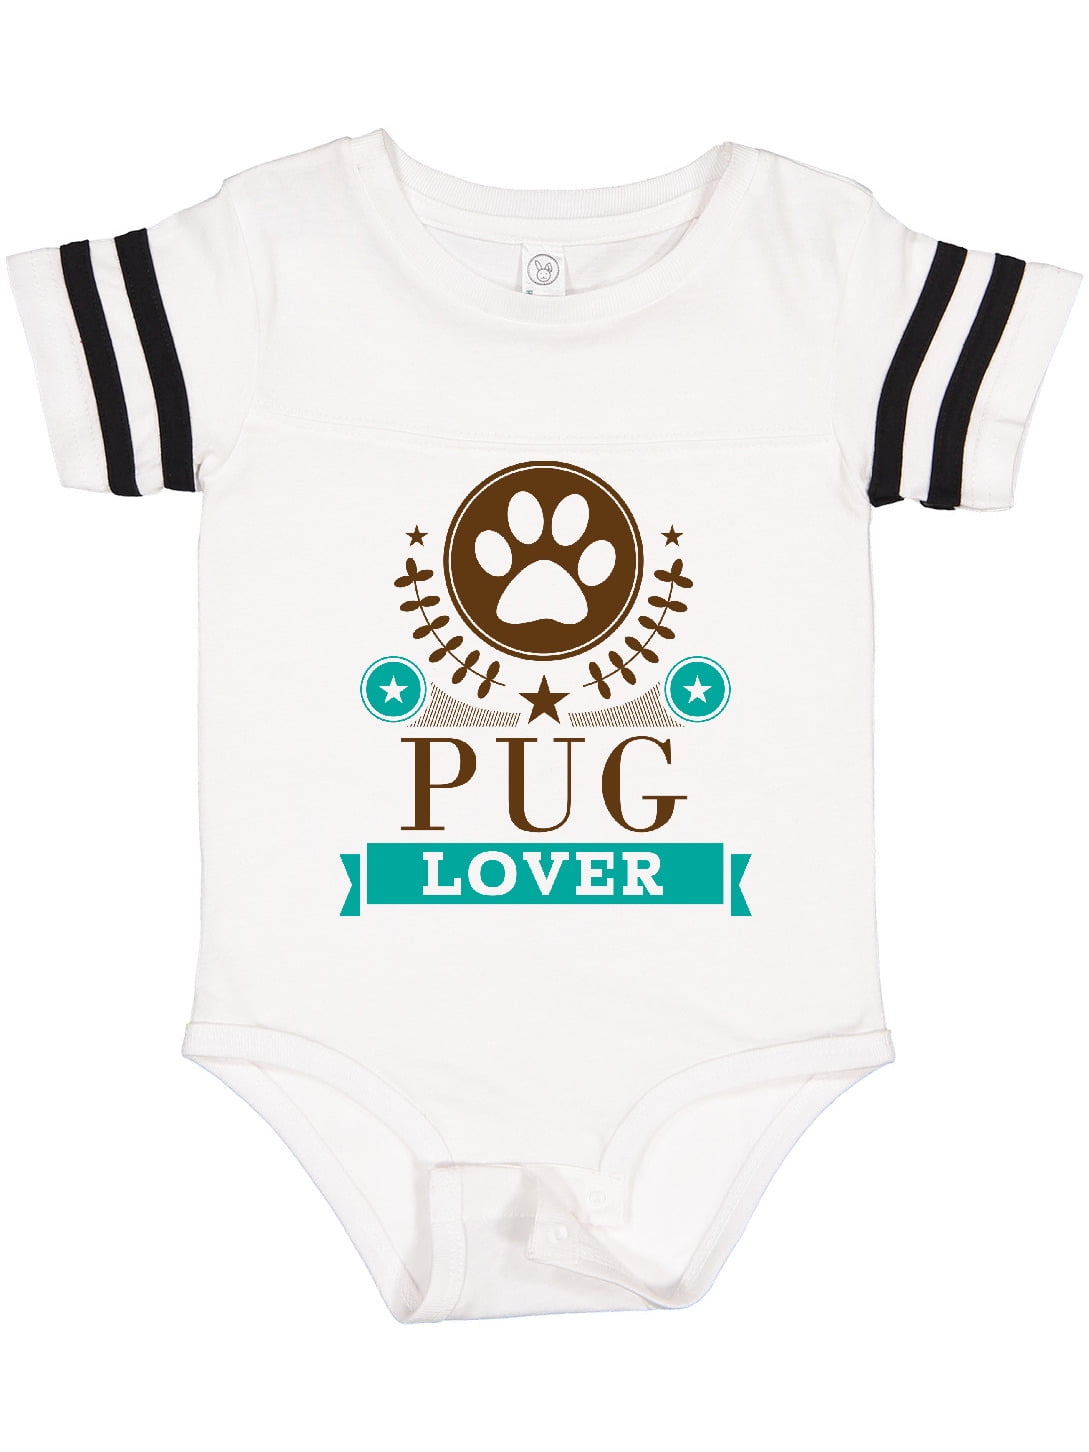 NEW Baby Boys Girls Bodysuit 3-6 Months Pug Dog Creeper Outfit 1 Piece Infant 